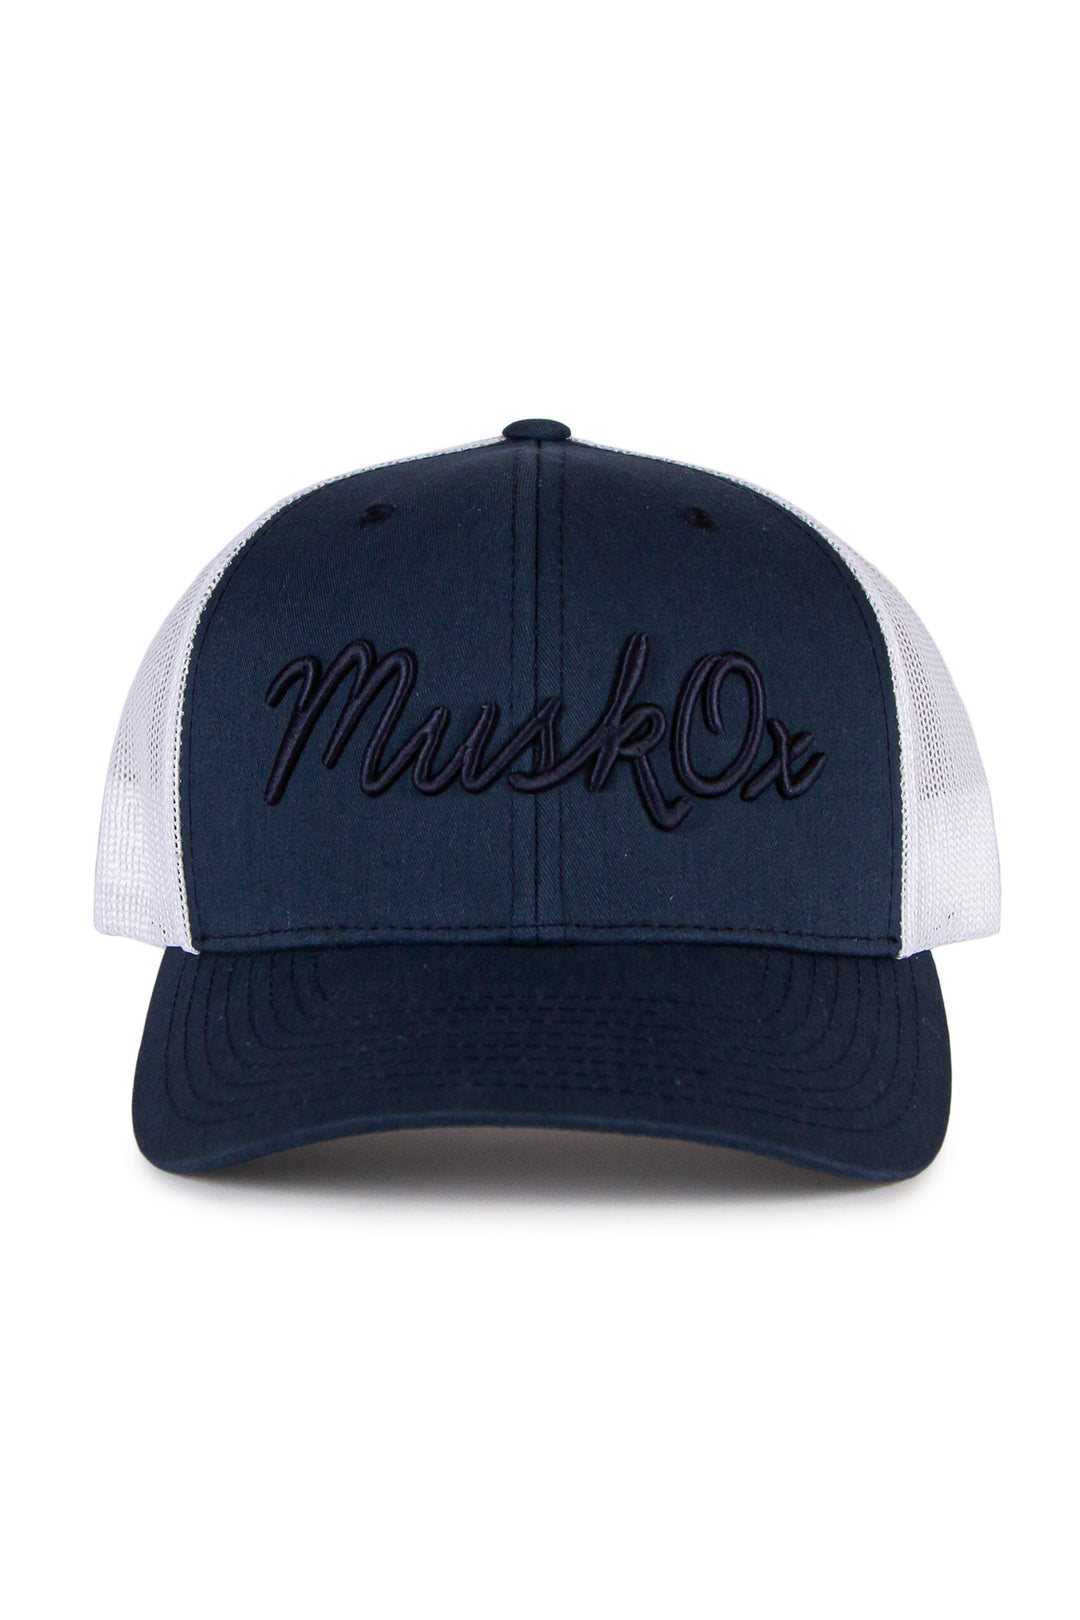 MuskOx Embroidered Trucker Hat in Navy and White, embroidered in USA